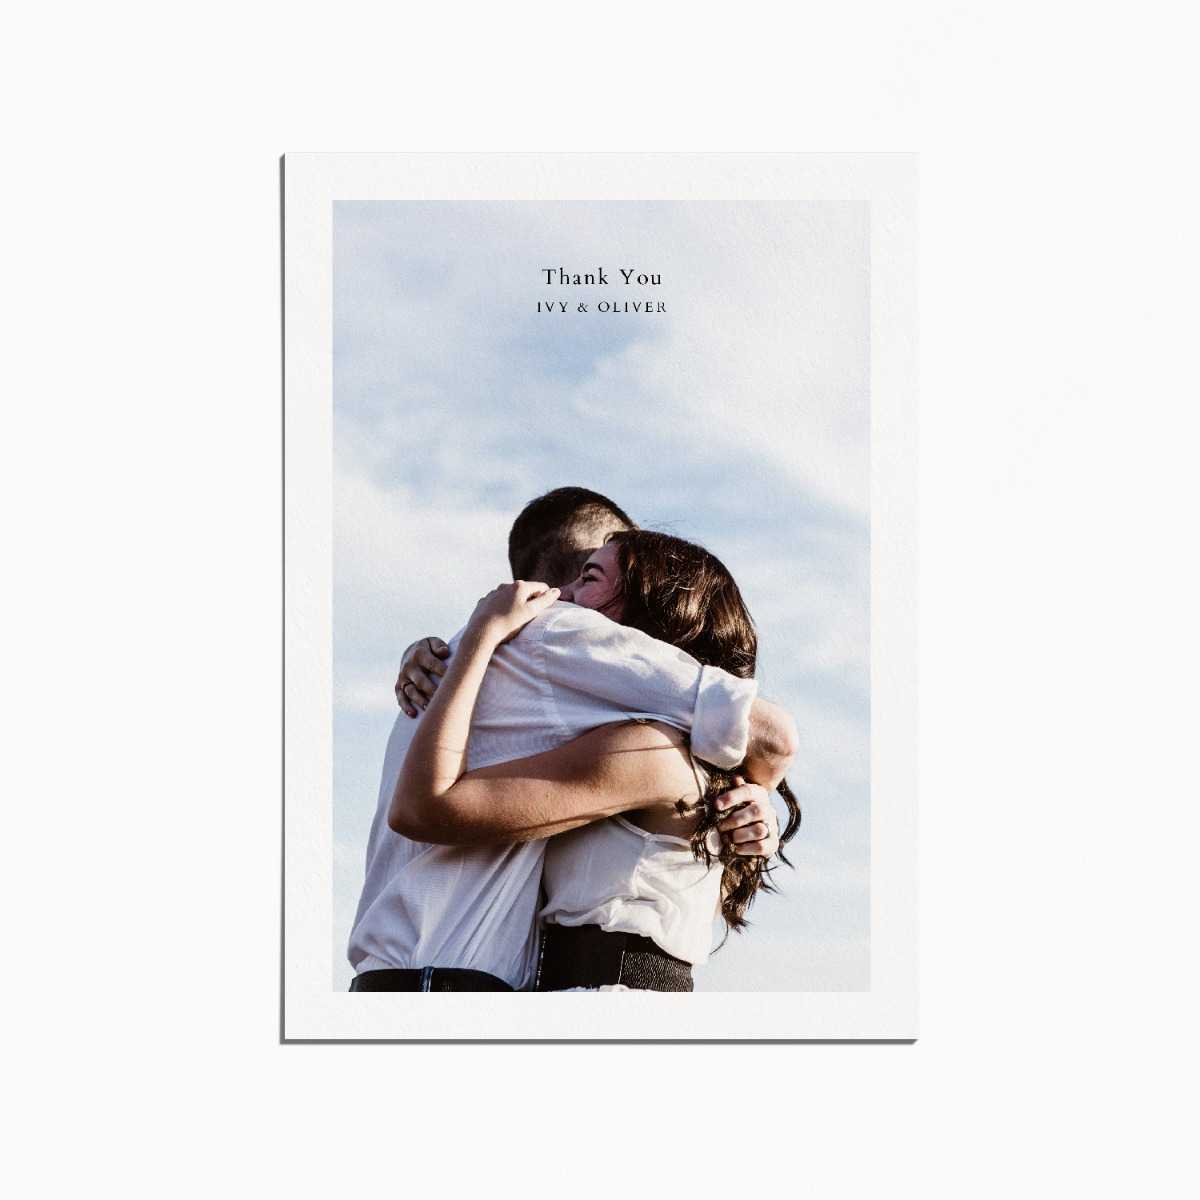 Thank you card with couple embracing